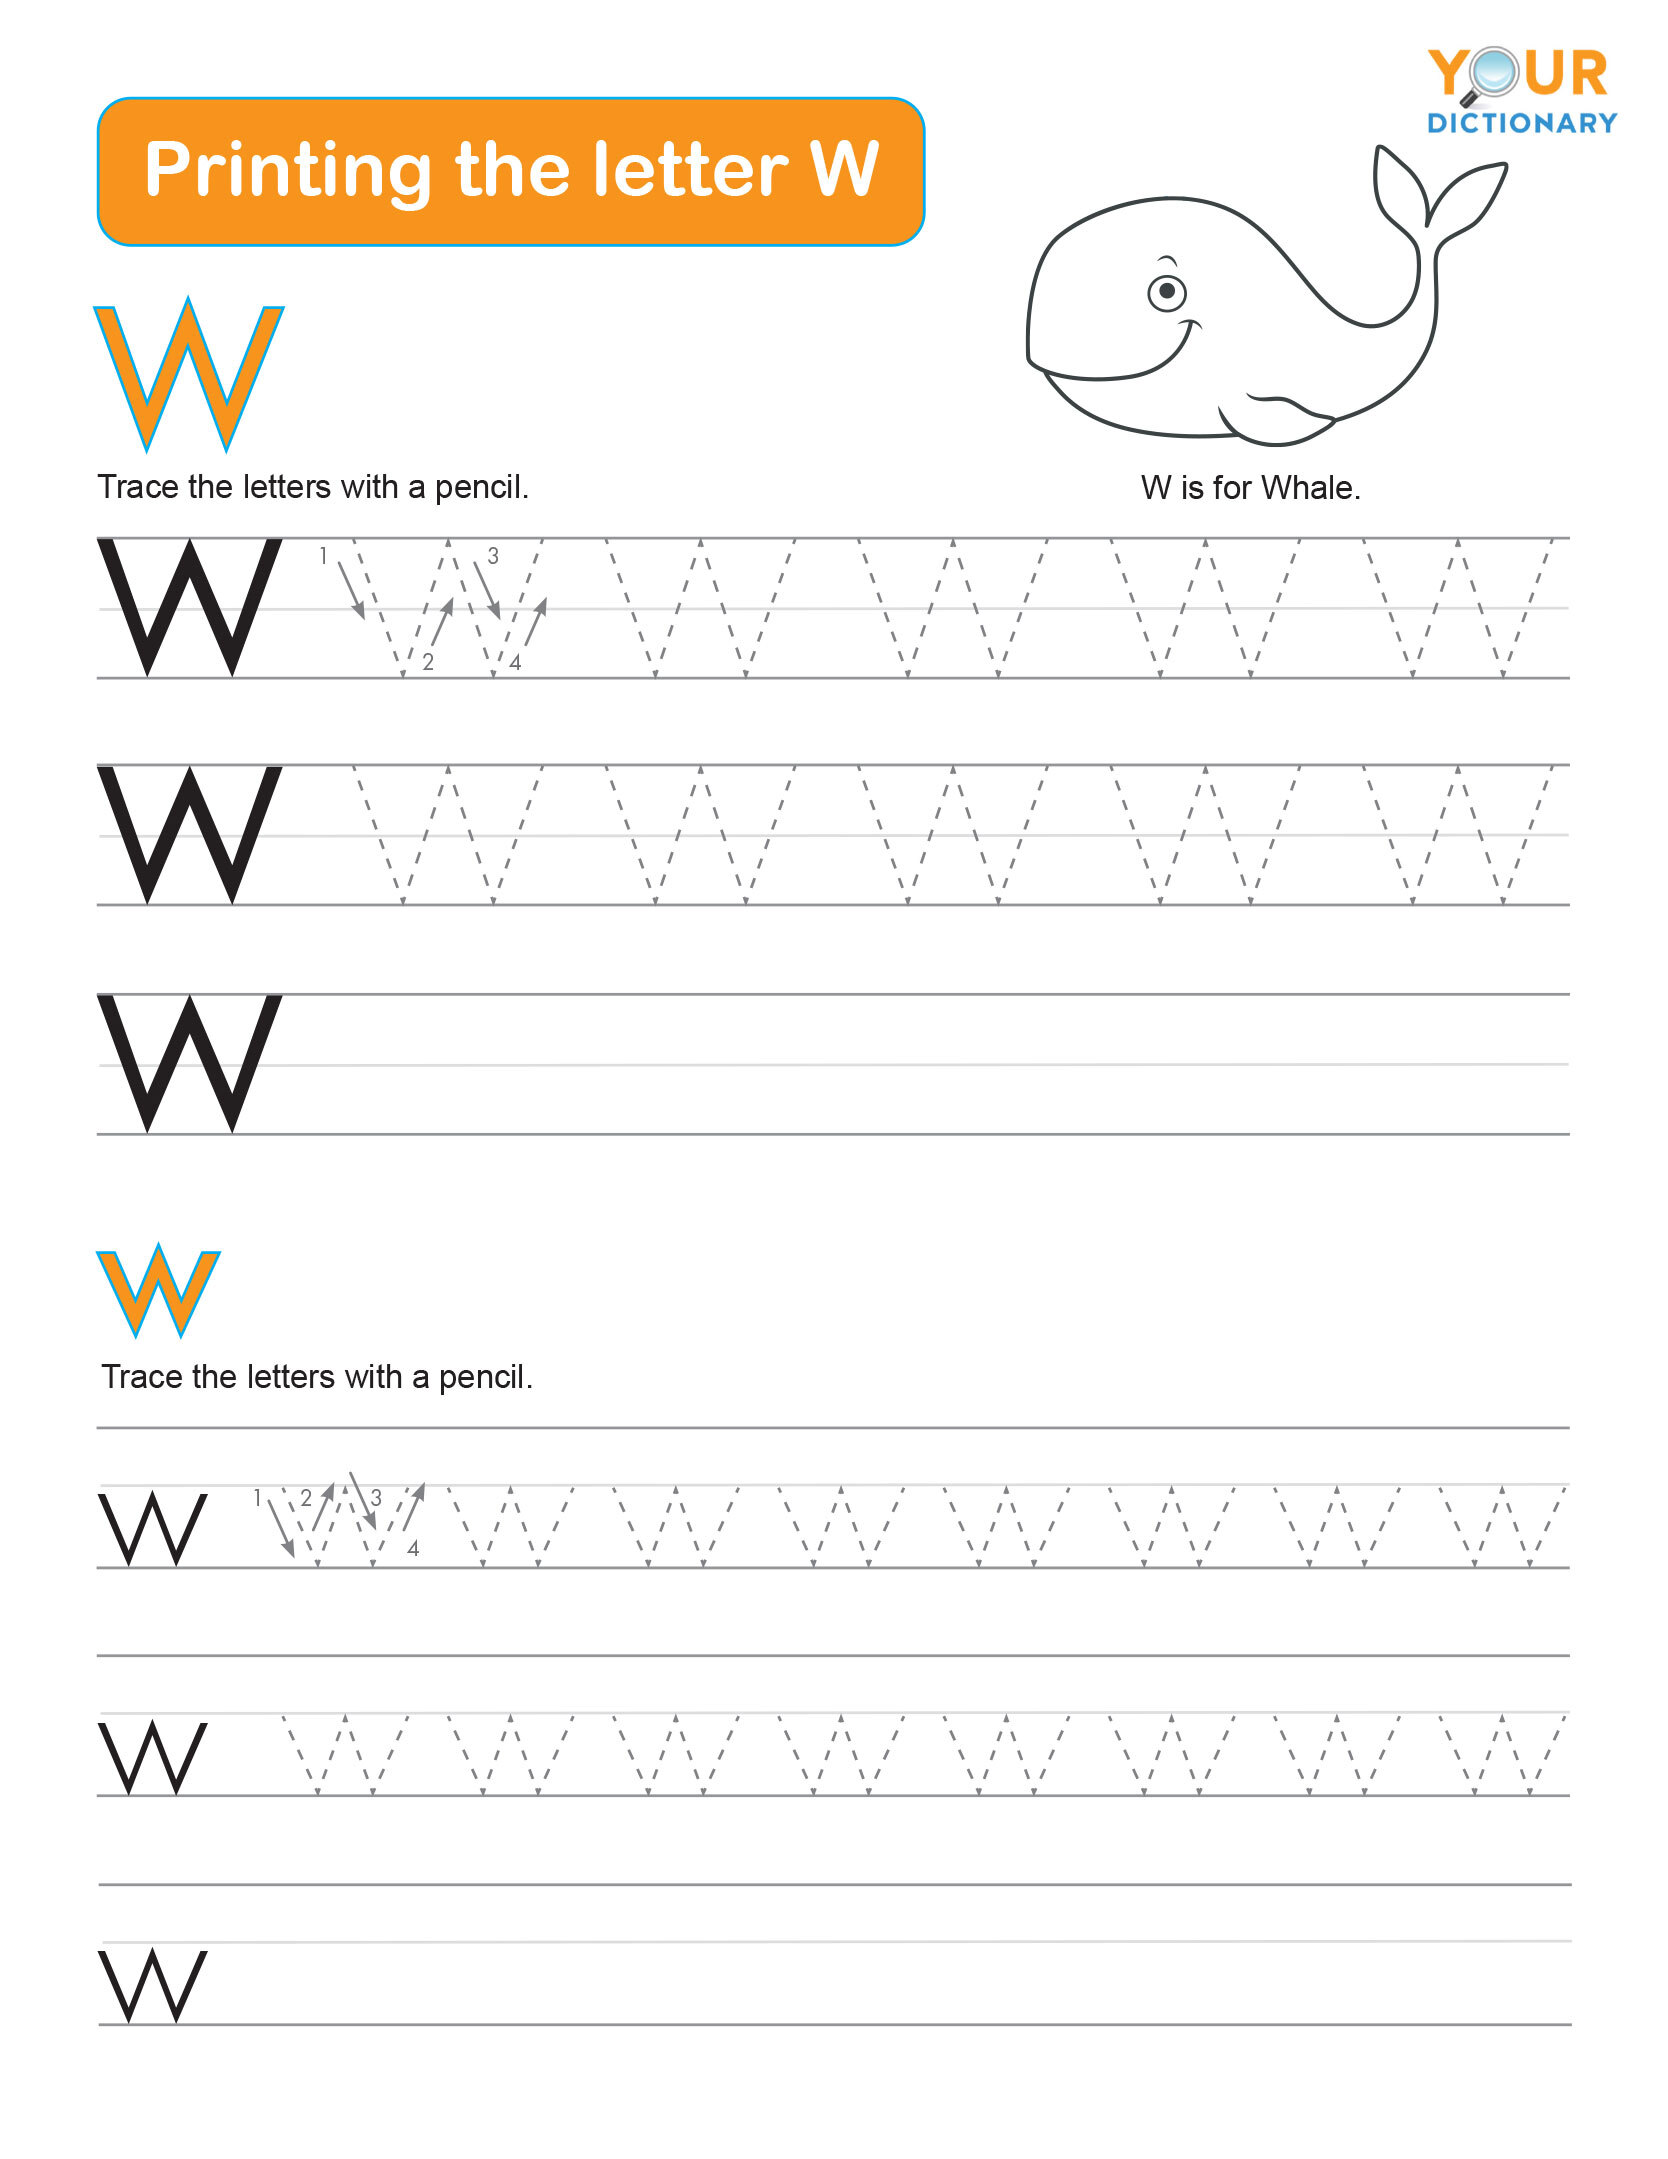 tracing the letter w practice worksheet